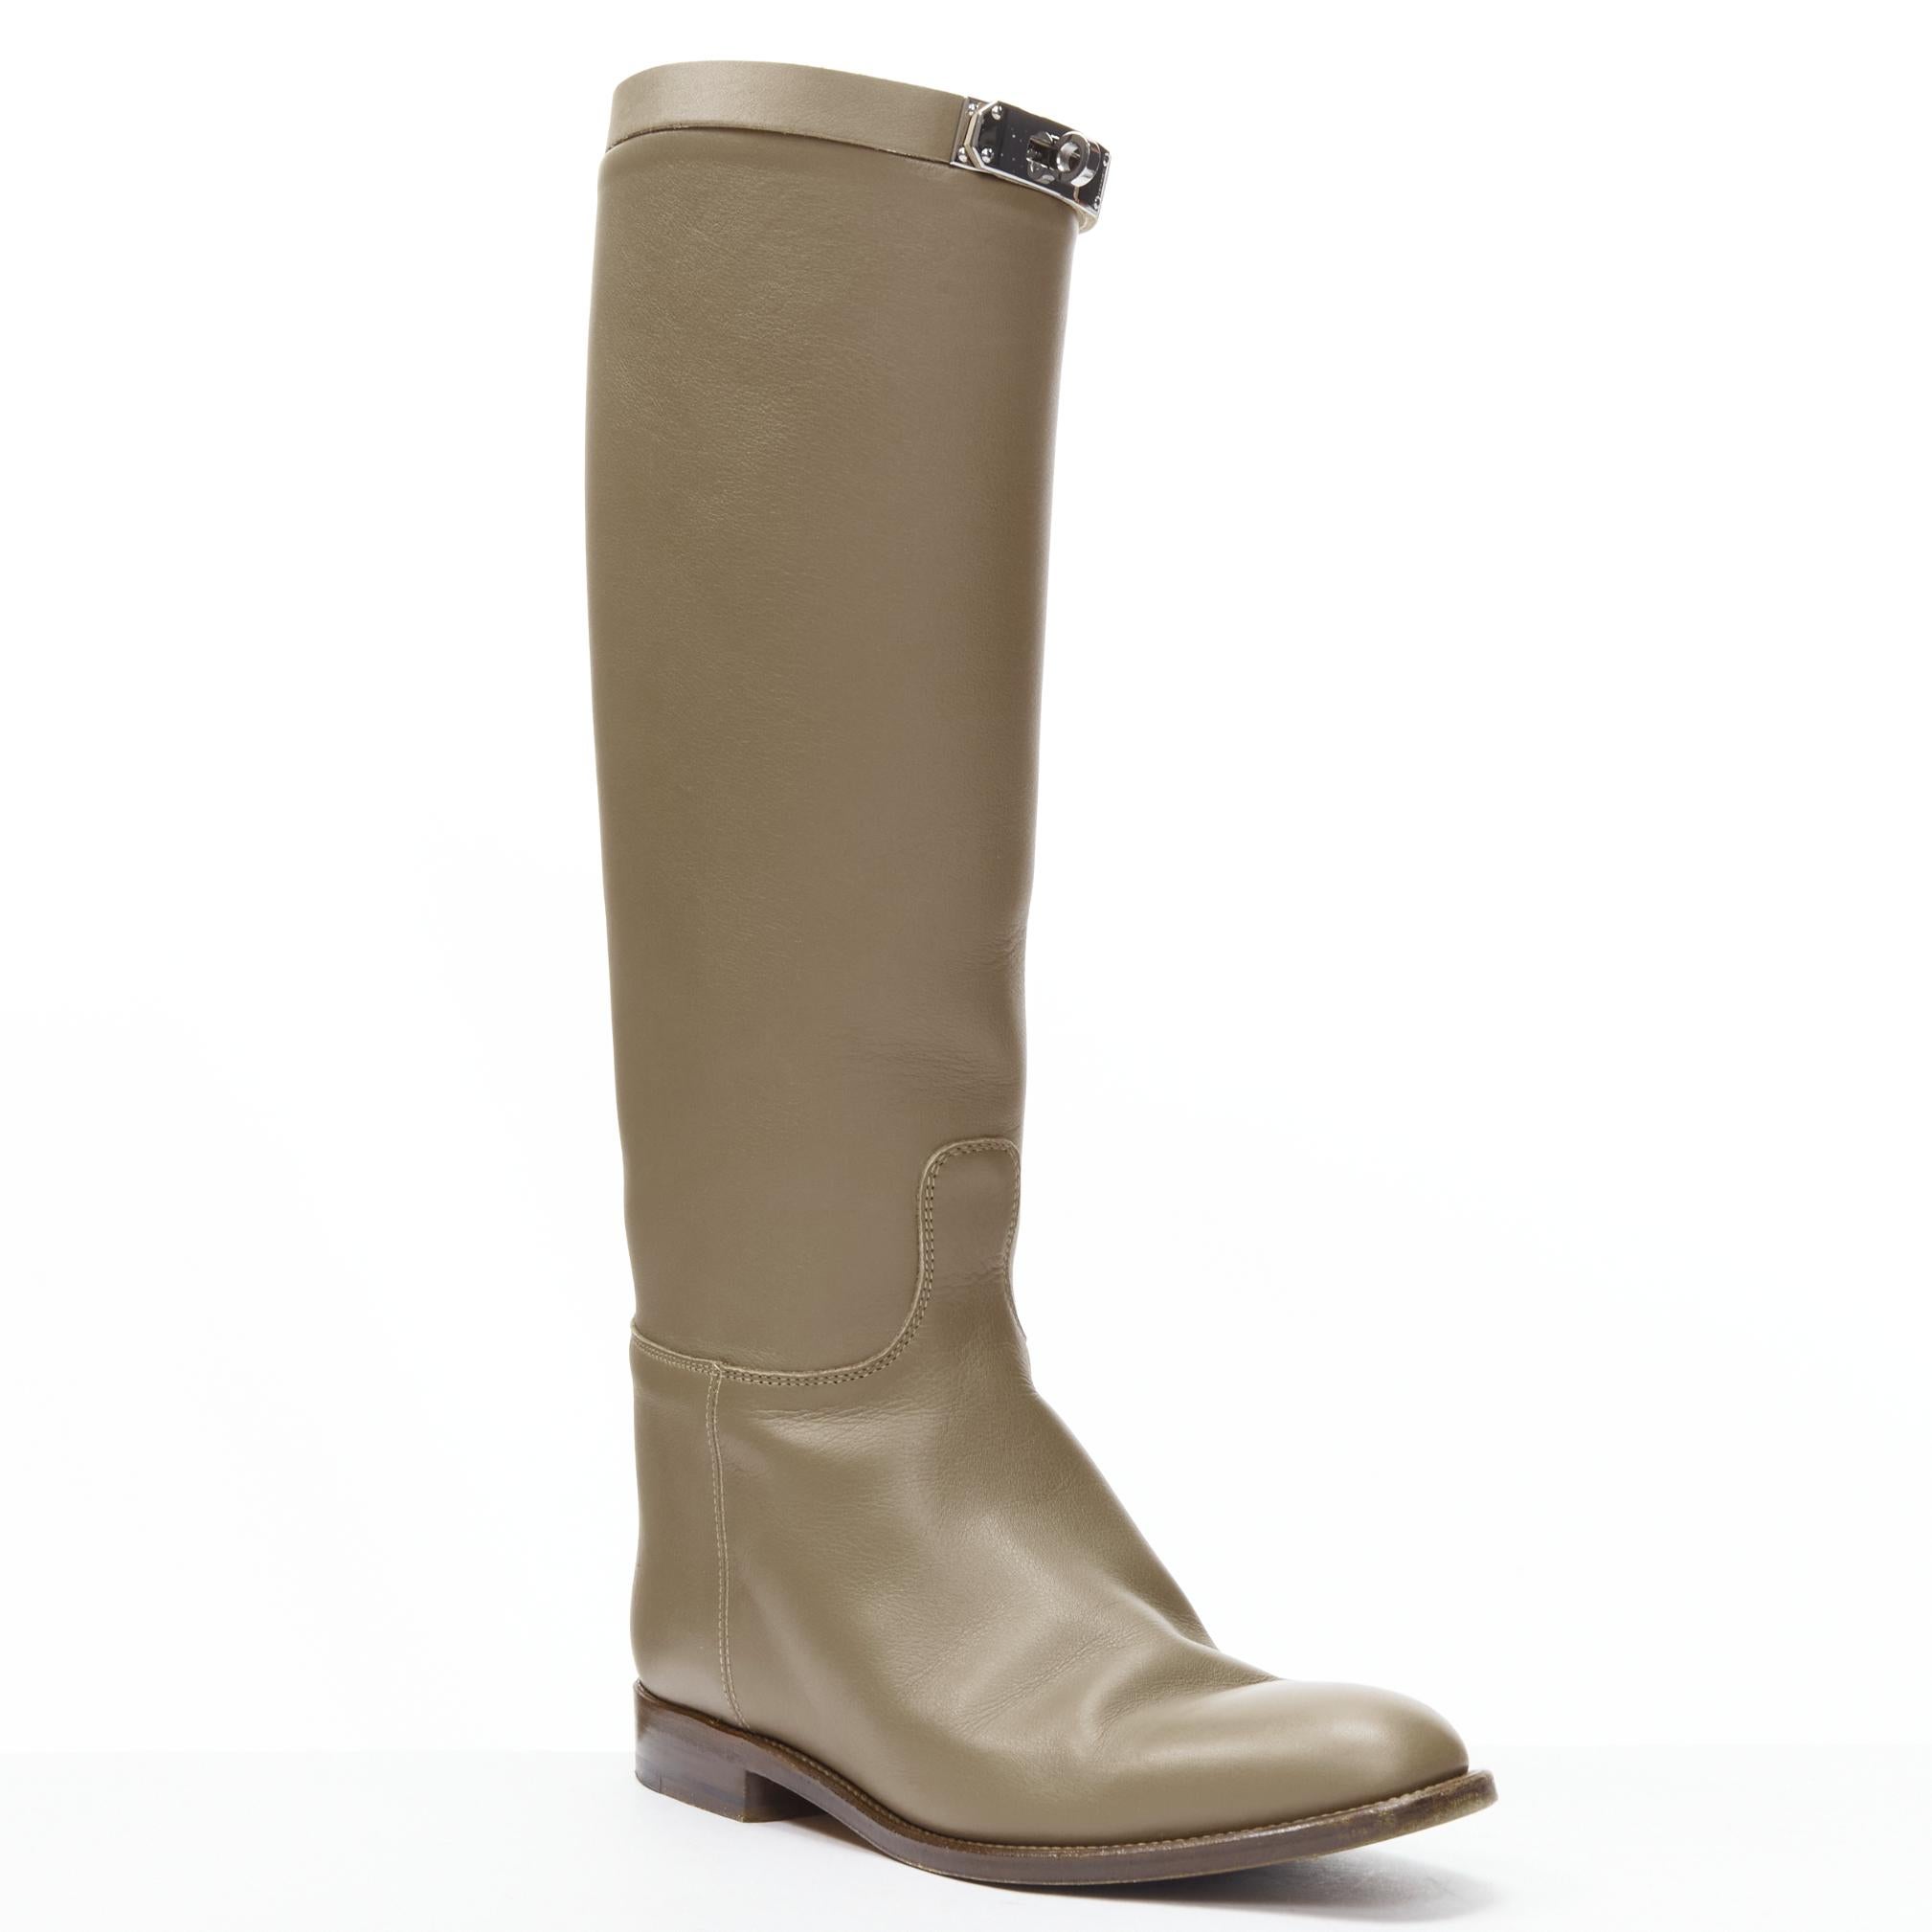 HERMES Kelly Jumping taupe brown PHW buckle riding boot EU37.5
Reference: MELK/A00229
Brand: Hermes
Model: Jumping Riding boot
Material: Leather
Color: White
Pattern: Solid
Closure: Turnlock
Lining: Leather
Extra Details: Pull on boots. PHW Kelly